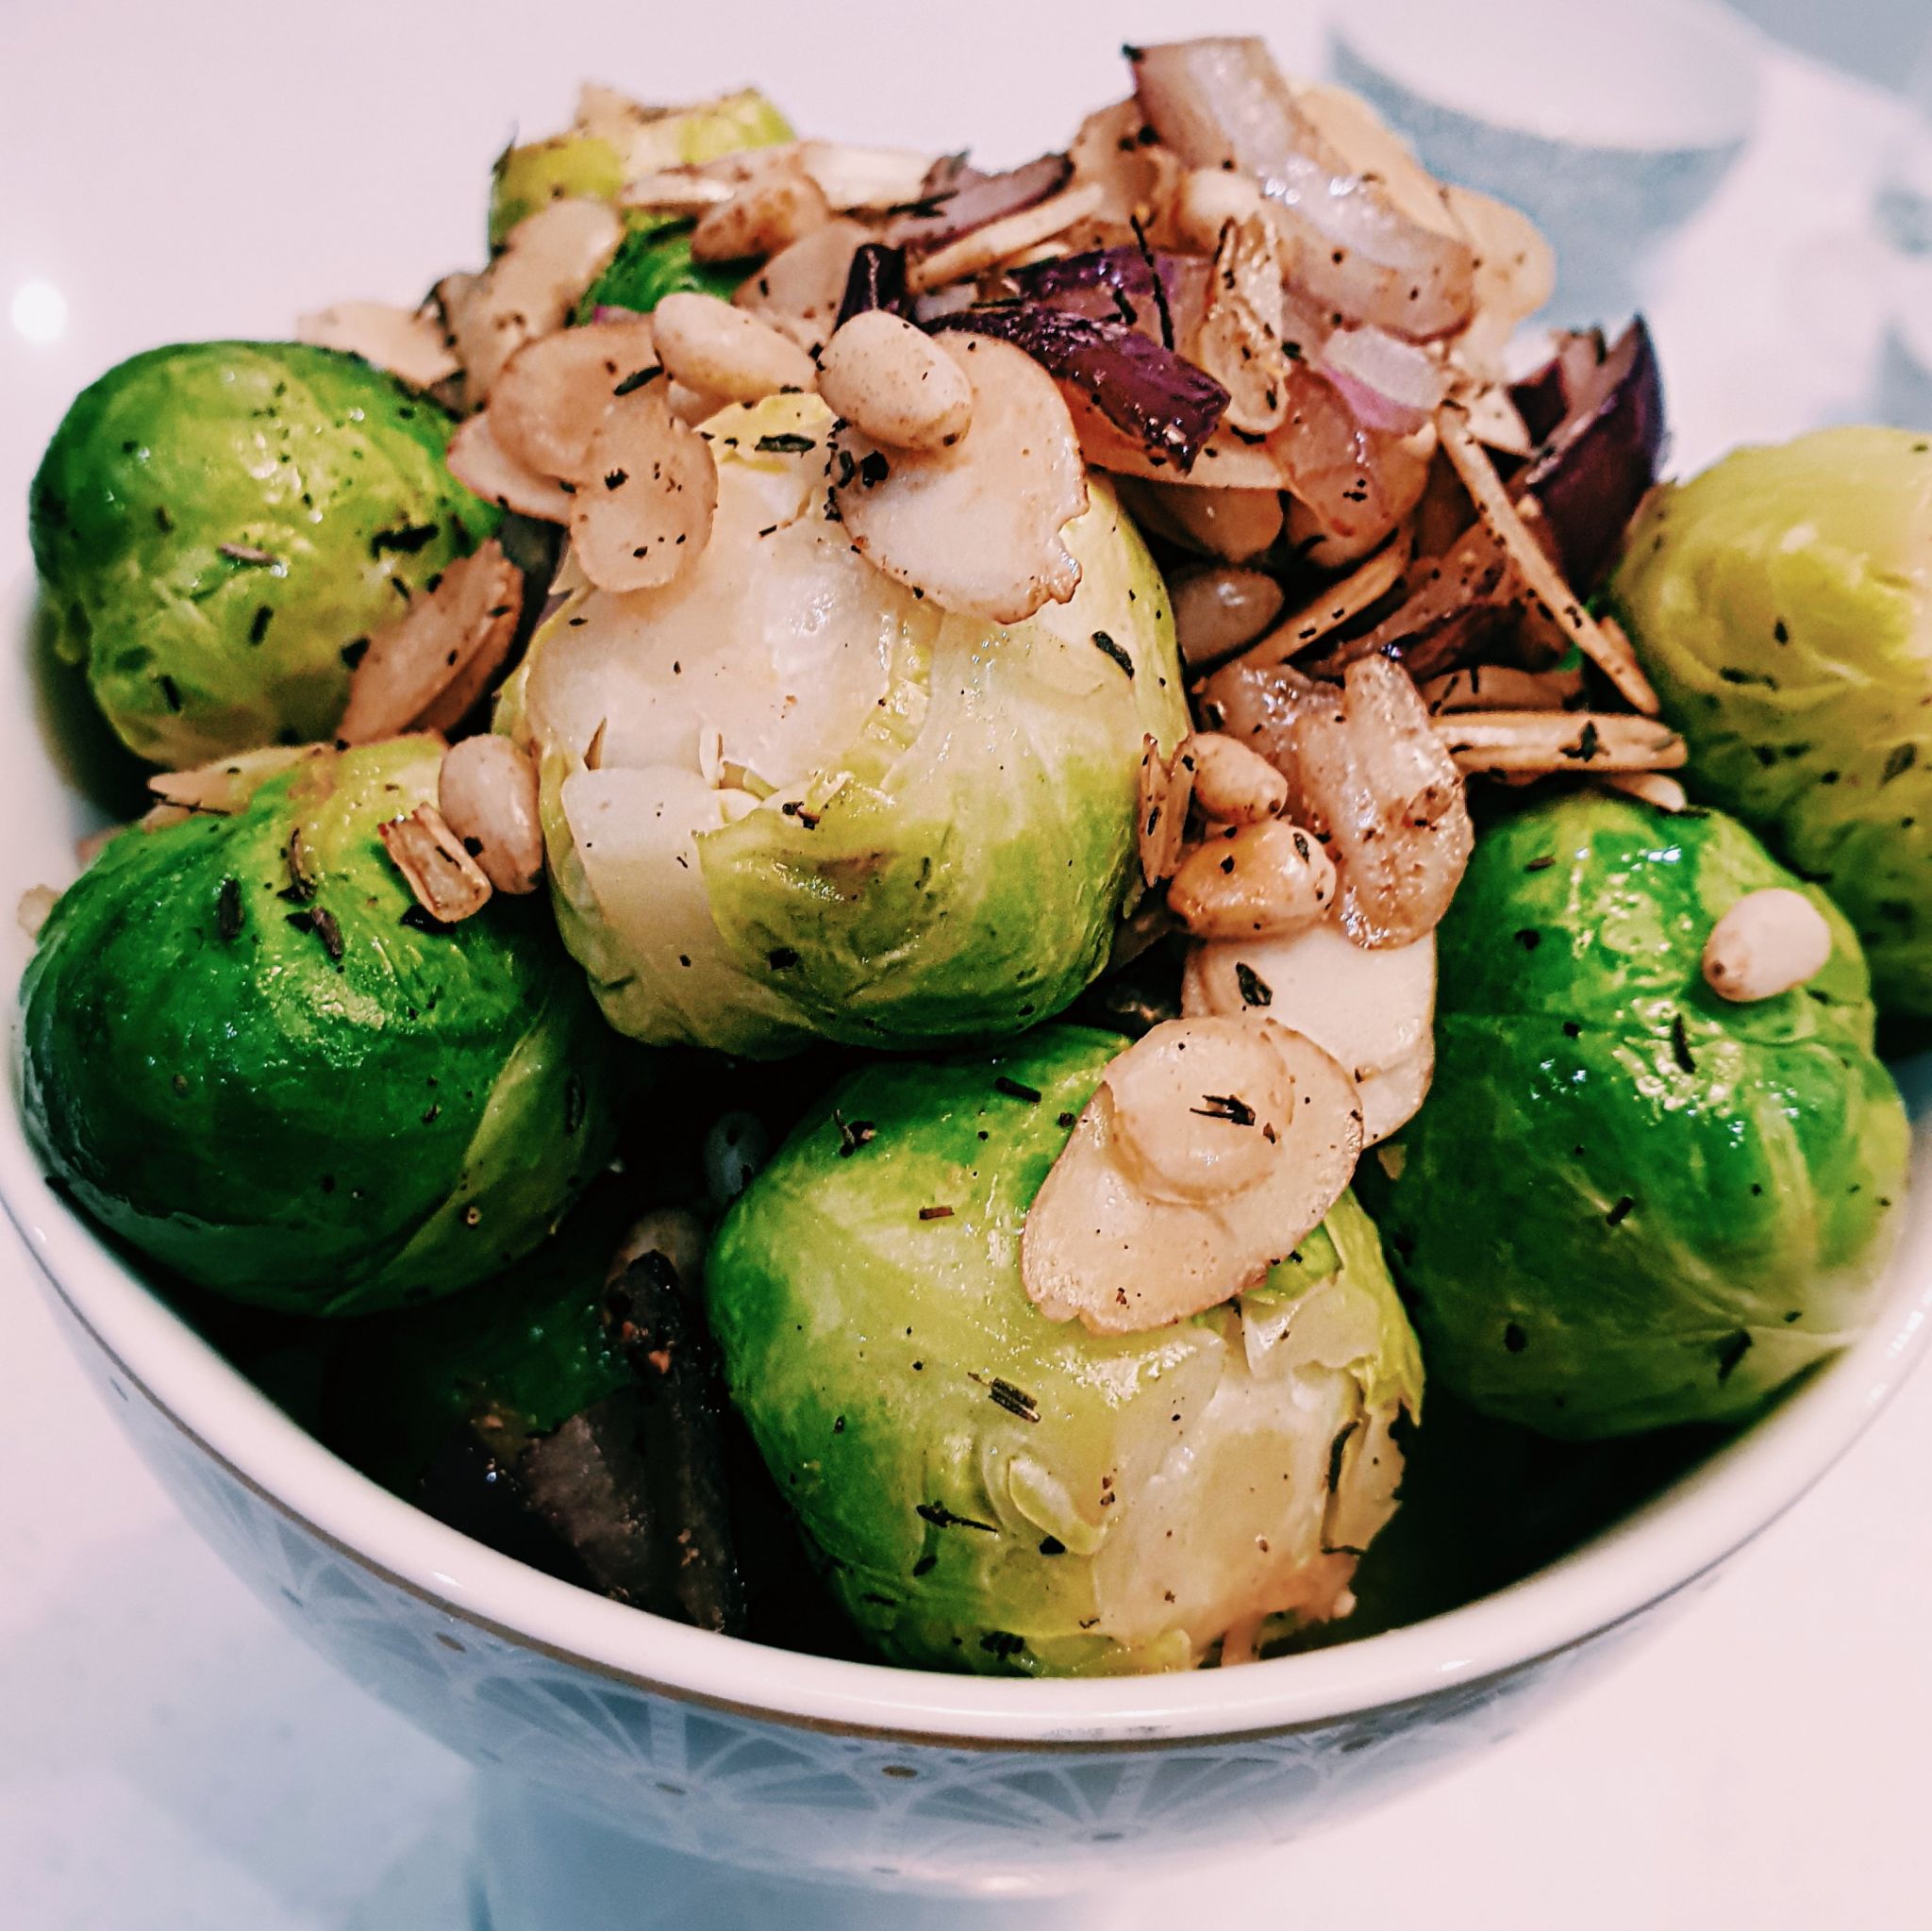 Brussel Sprouts with pine nuts